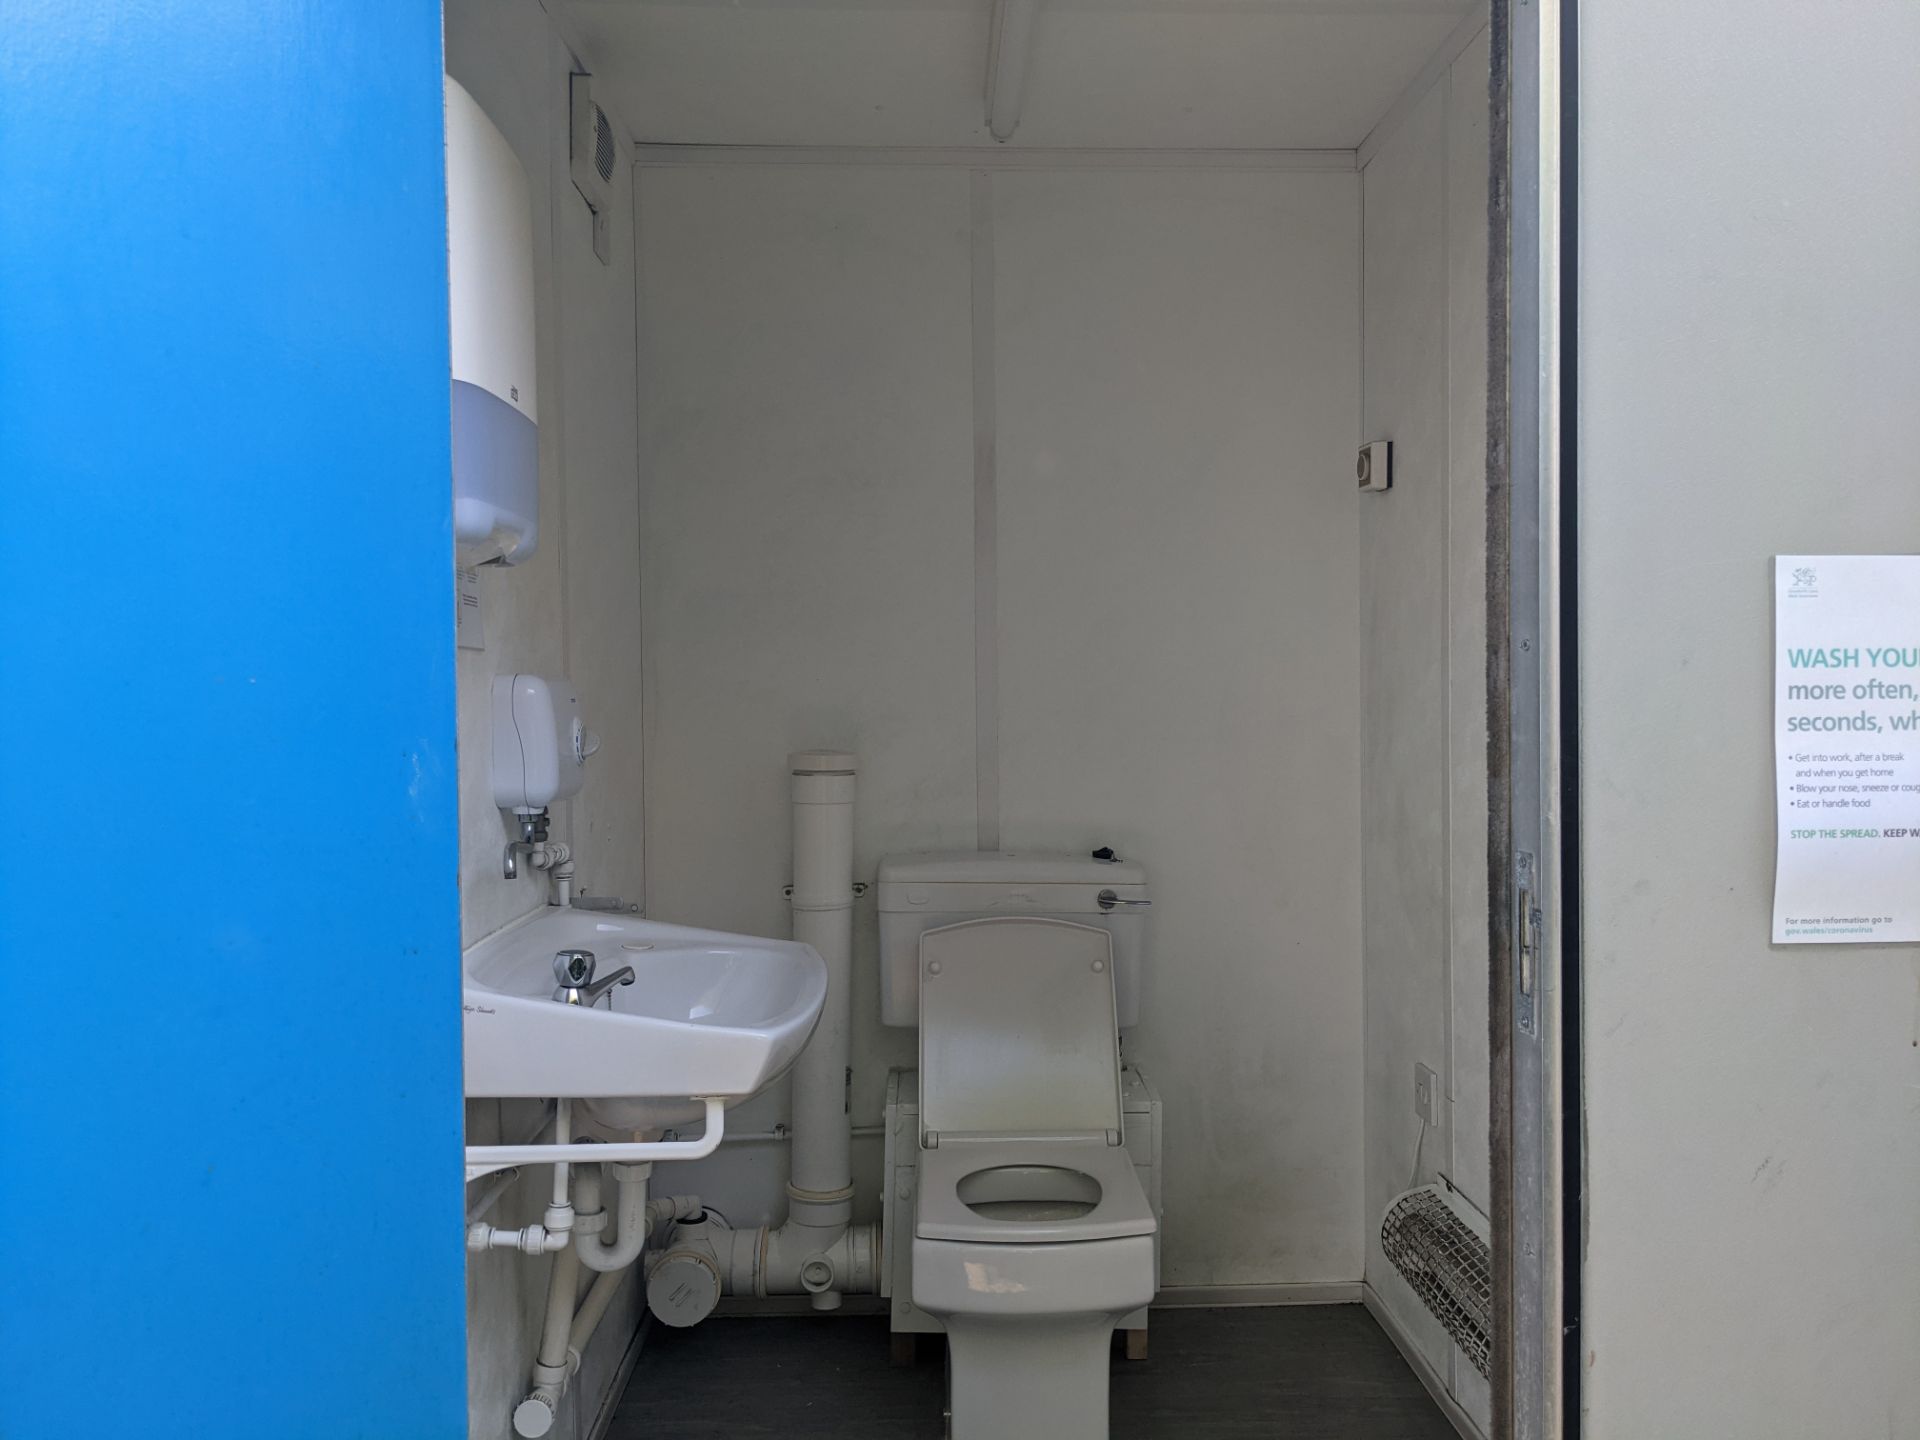 PORTABLE TOILET CABIN 12FT X 9FT - Image 3 of 6